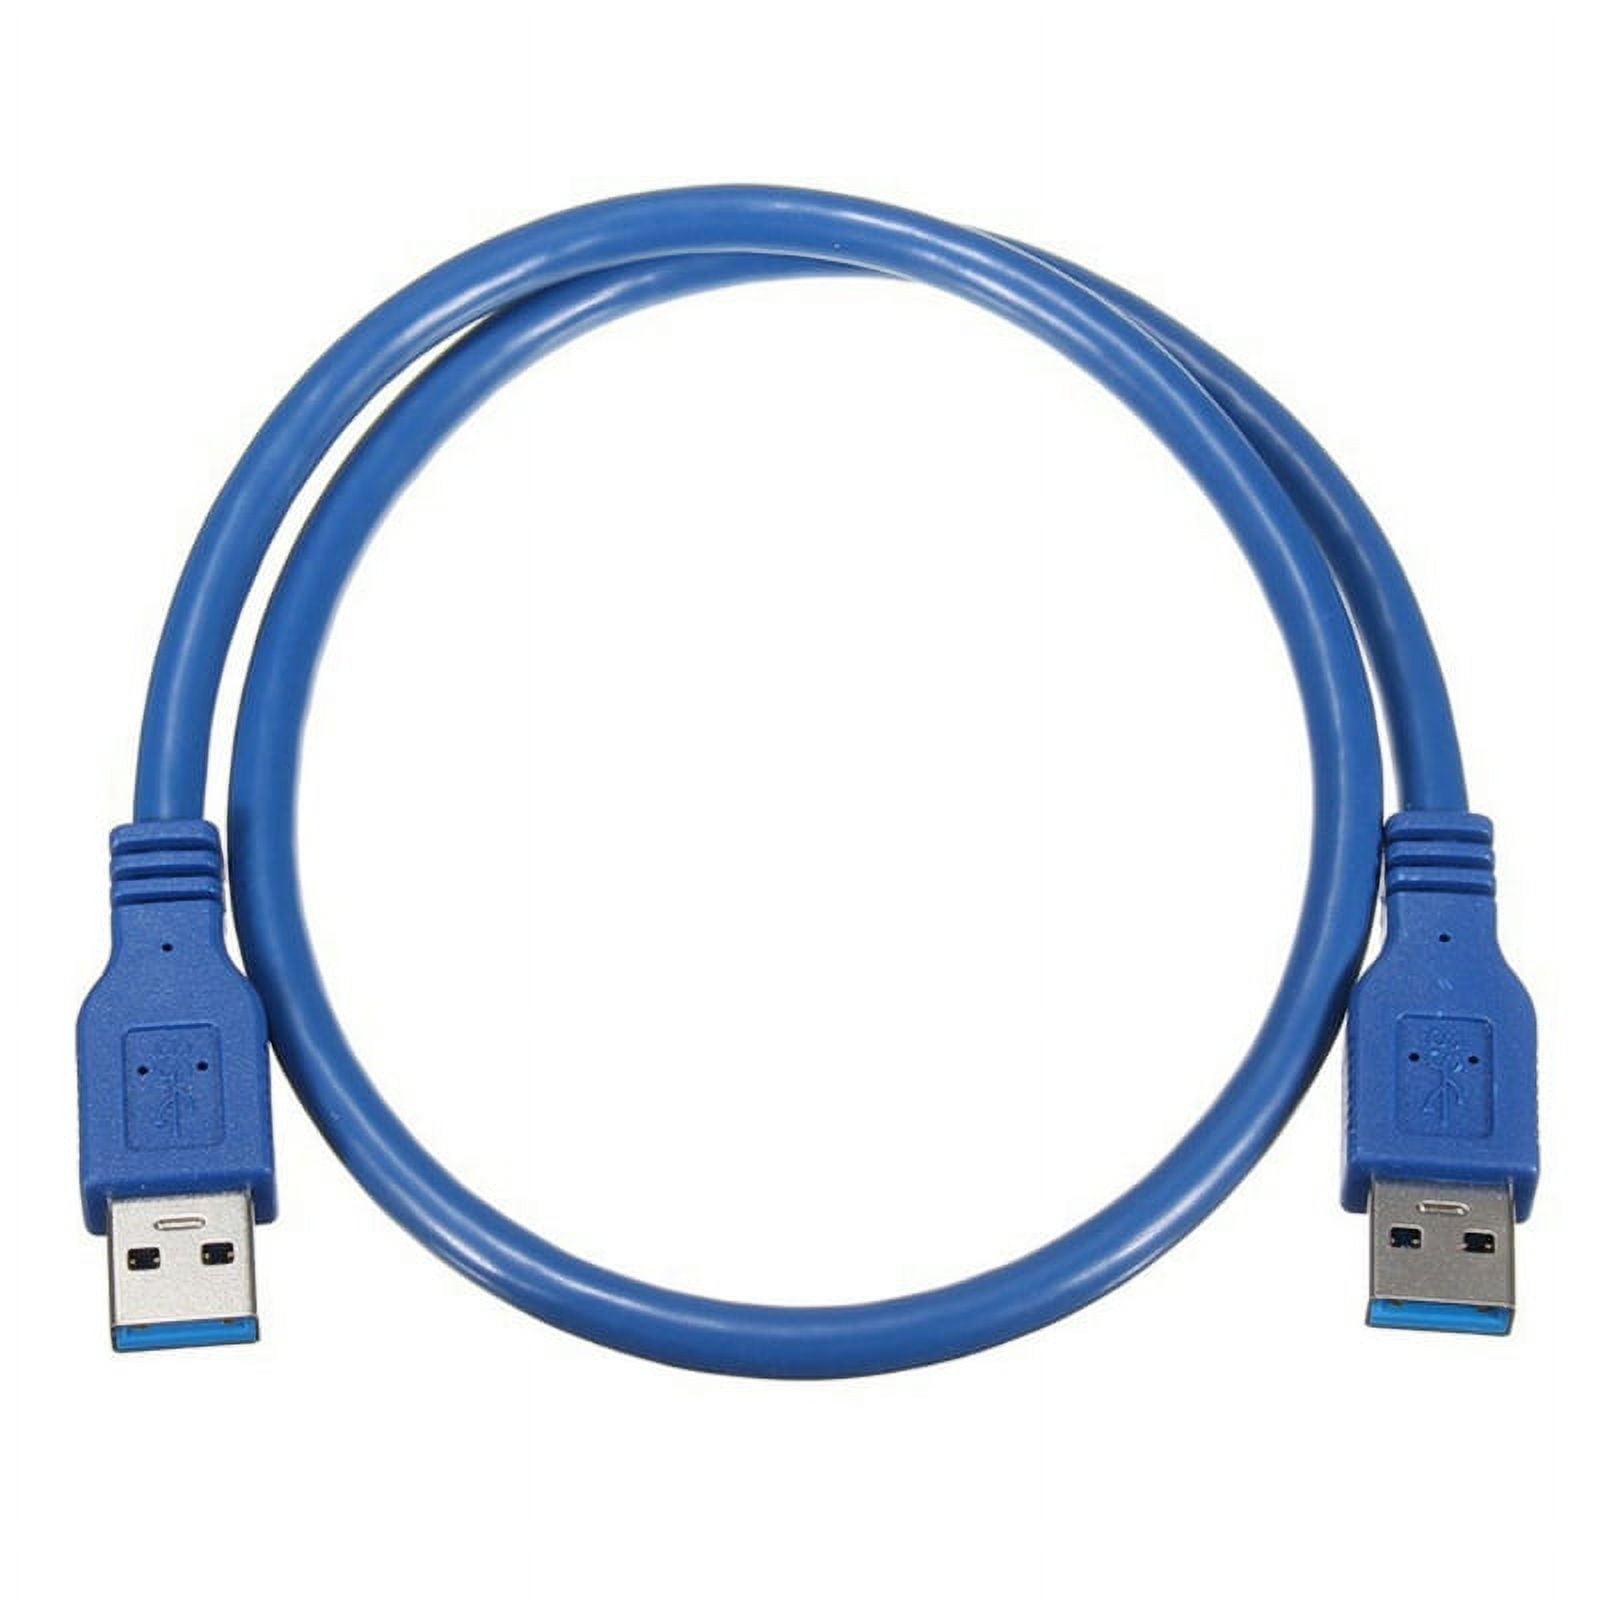 Generic USB 3.0 Cable 150cm USB to USB Cables Type A Male to Male USB3.0 à  prix pas cher